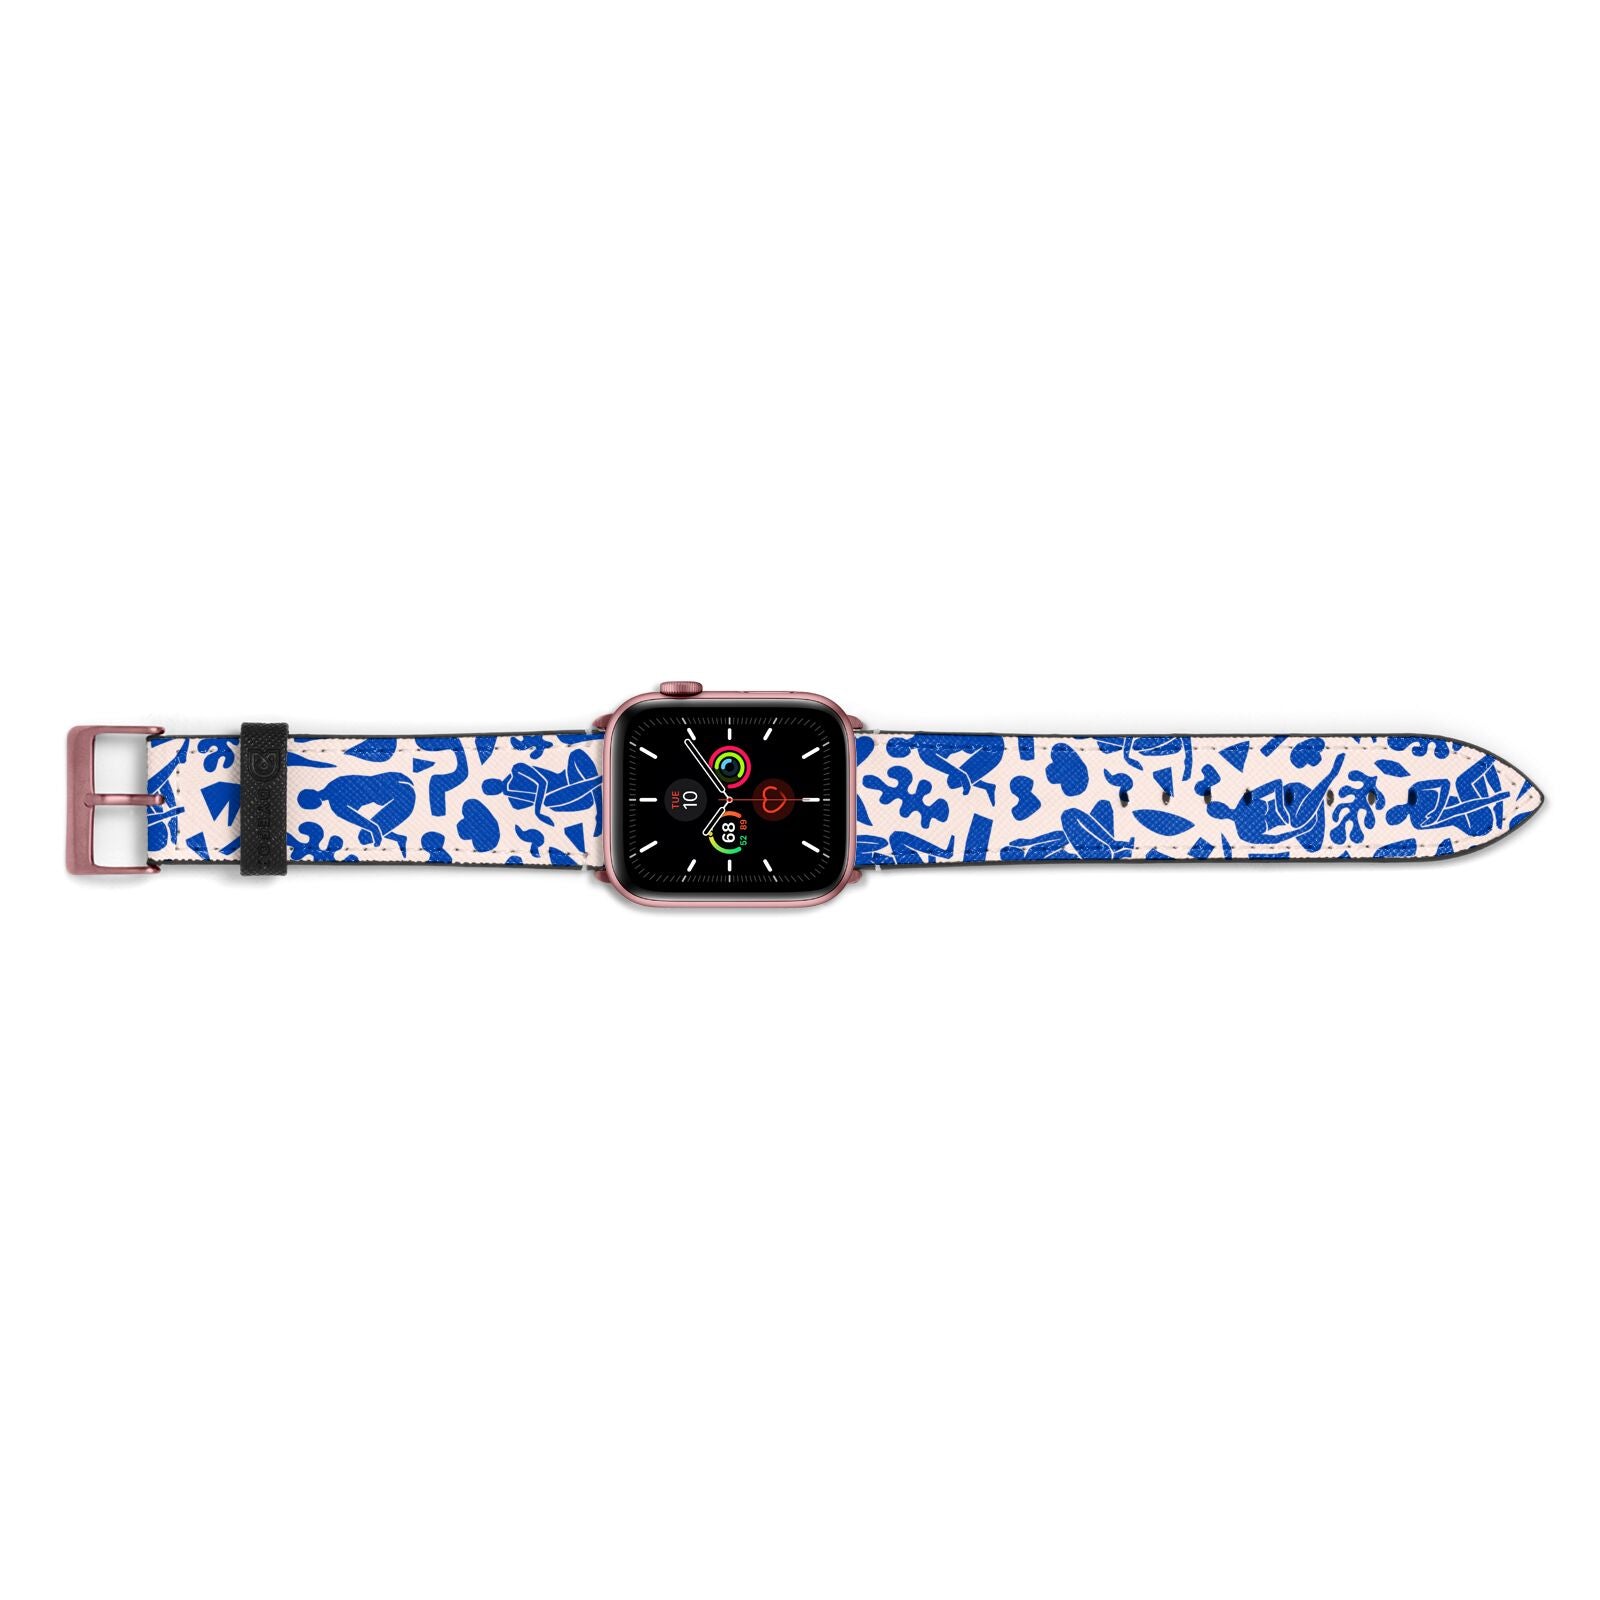 Abstract Art Apple Watch Strap Landscape Image Rose Gold Hardware